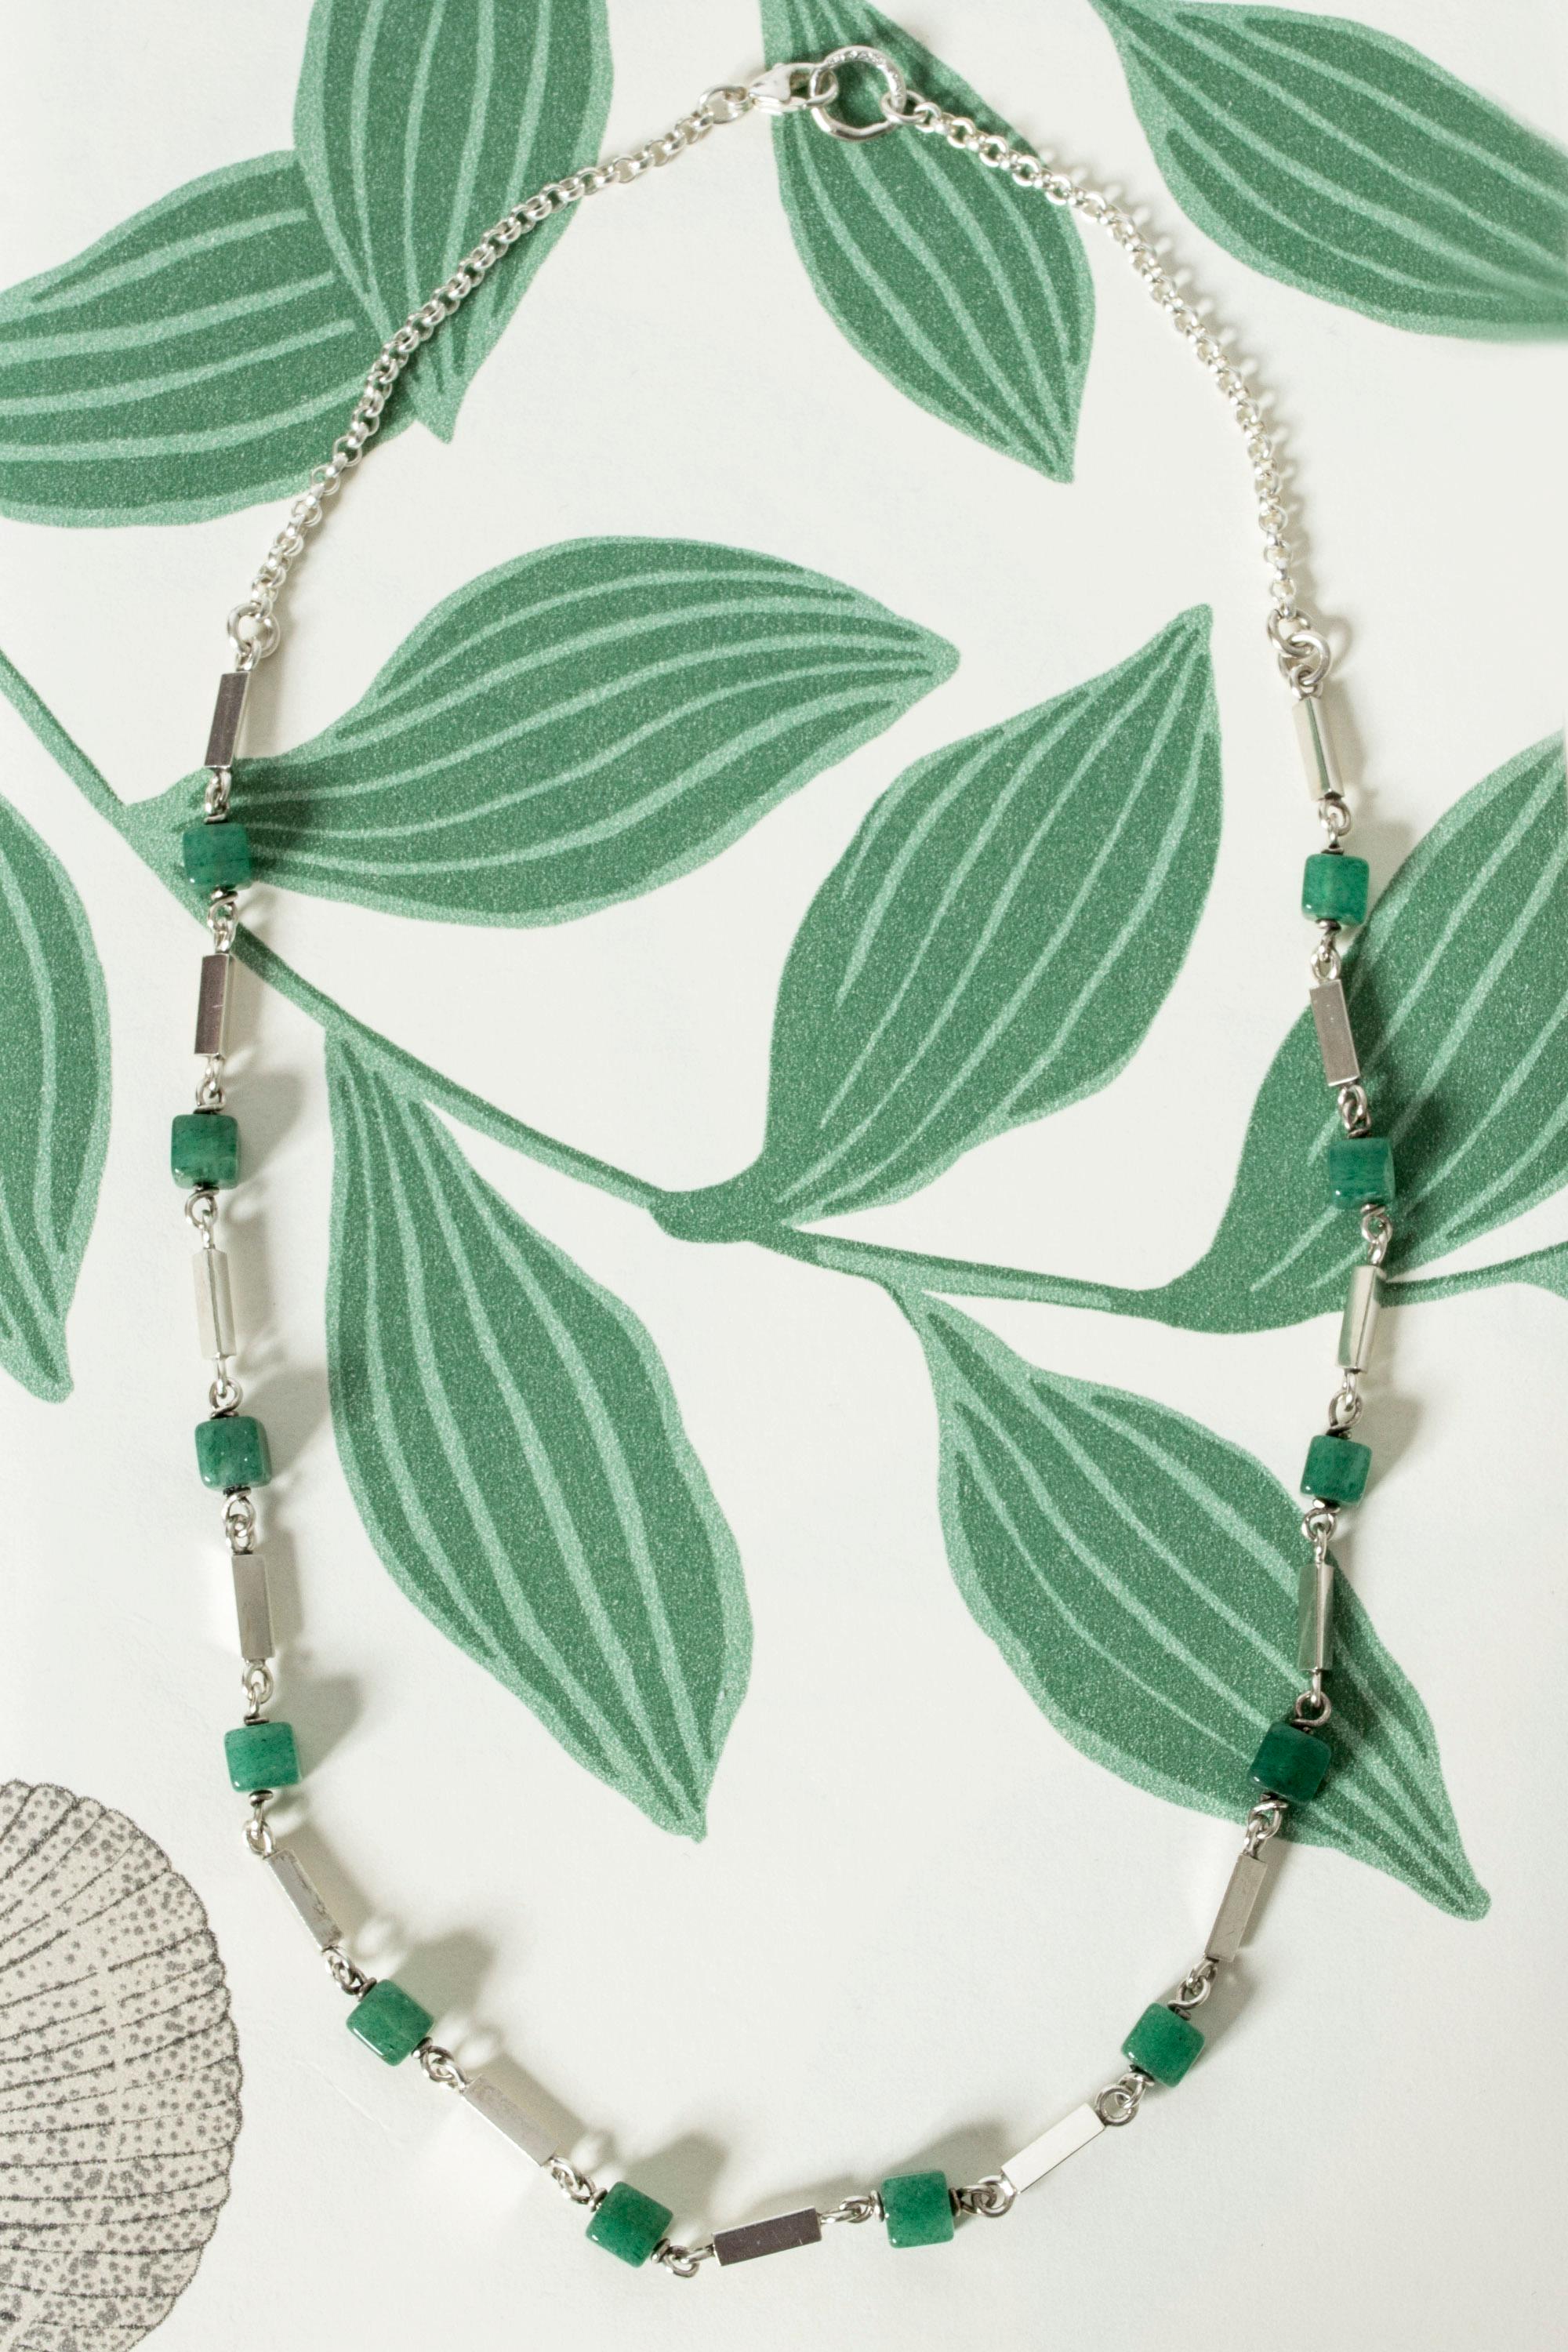 Lovely silver collier by Arvo Saarela, with aventurine cubes alternating with long silver sections. Easy to wear and subtly expressive.